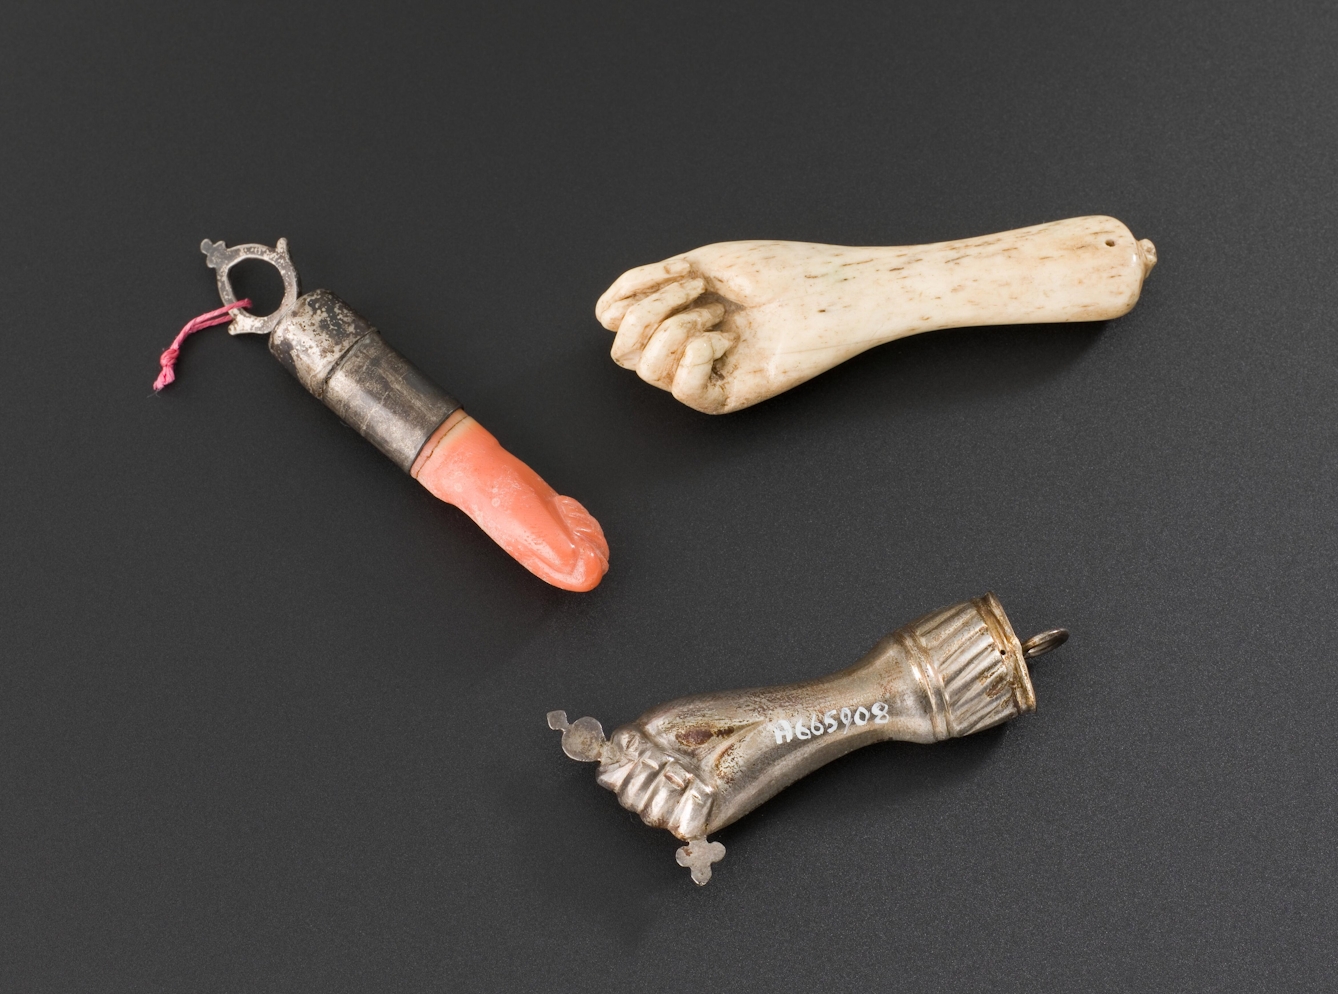 Photograph of a set of 3 amulets on a textured grey background. All three represent the forearm and hand of a human, made out of different materials including bone and metal.